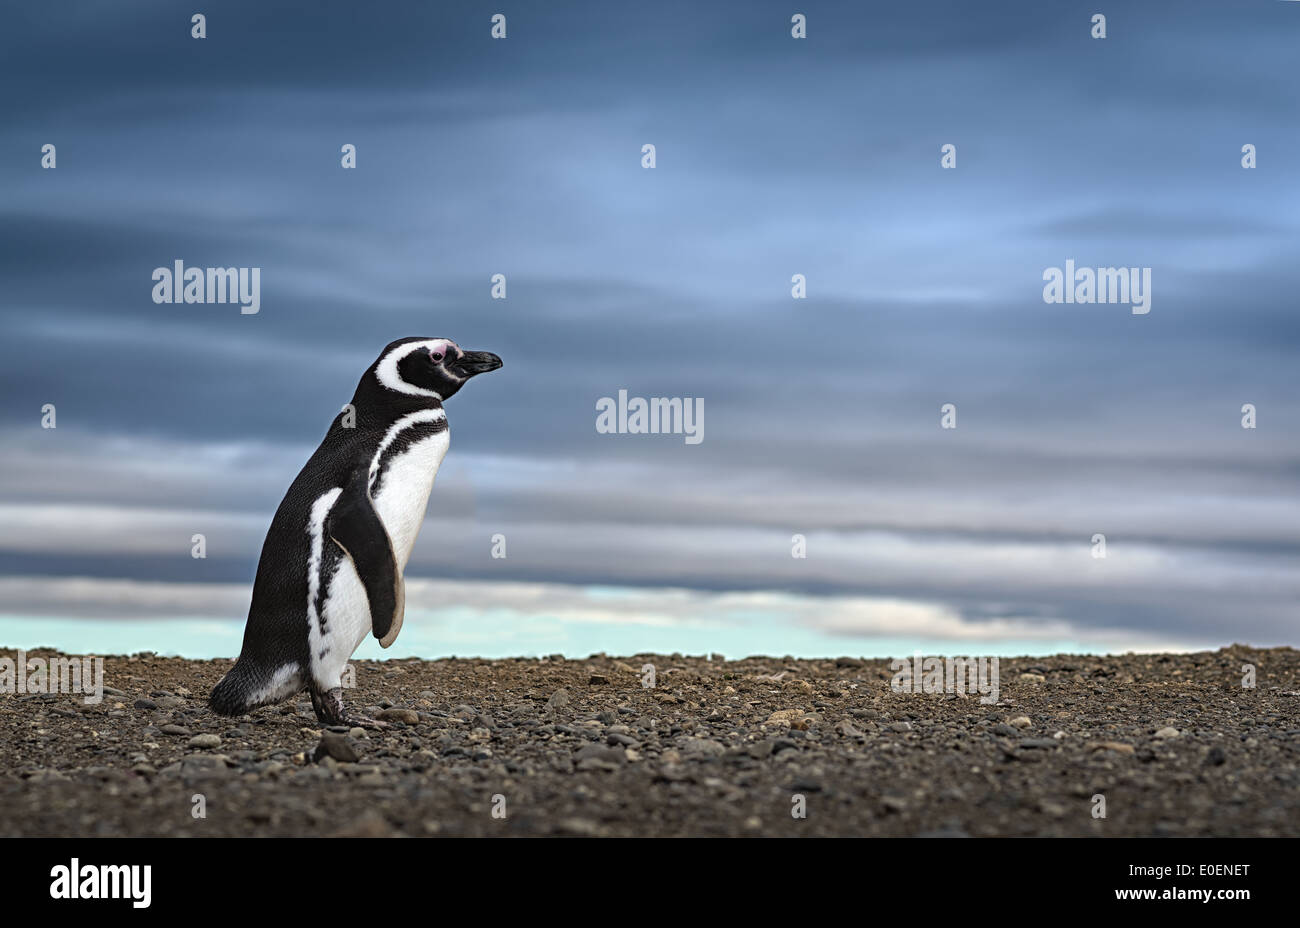 Adorable penguin in Patagonia. Inspiring Travel Image. High definition image. Stock Photo